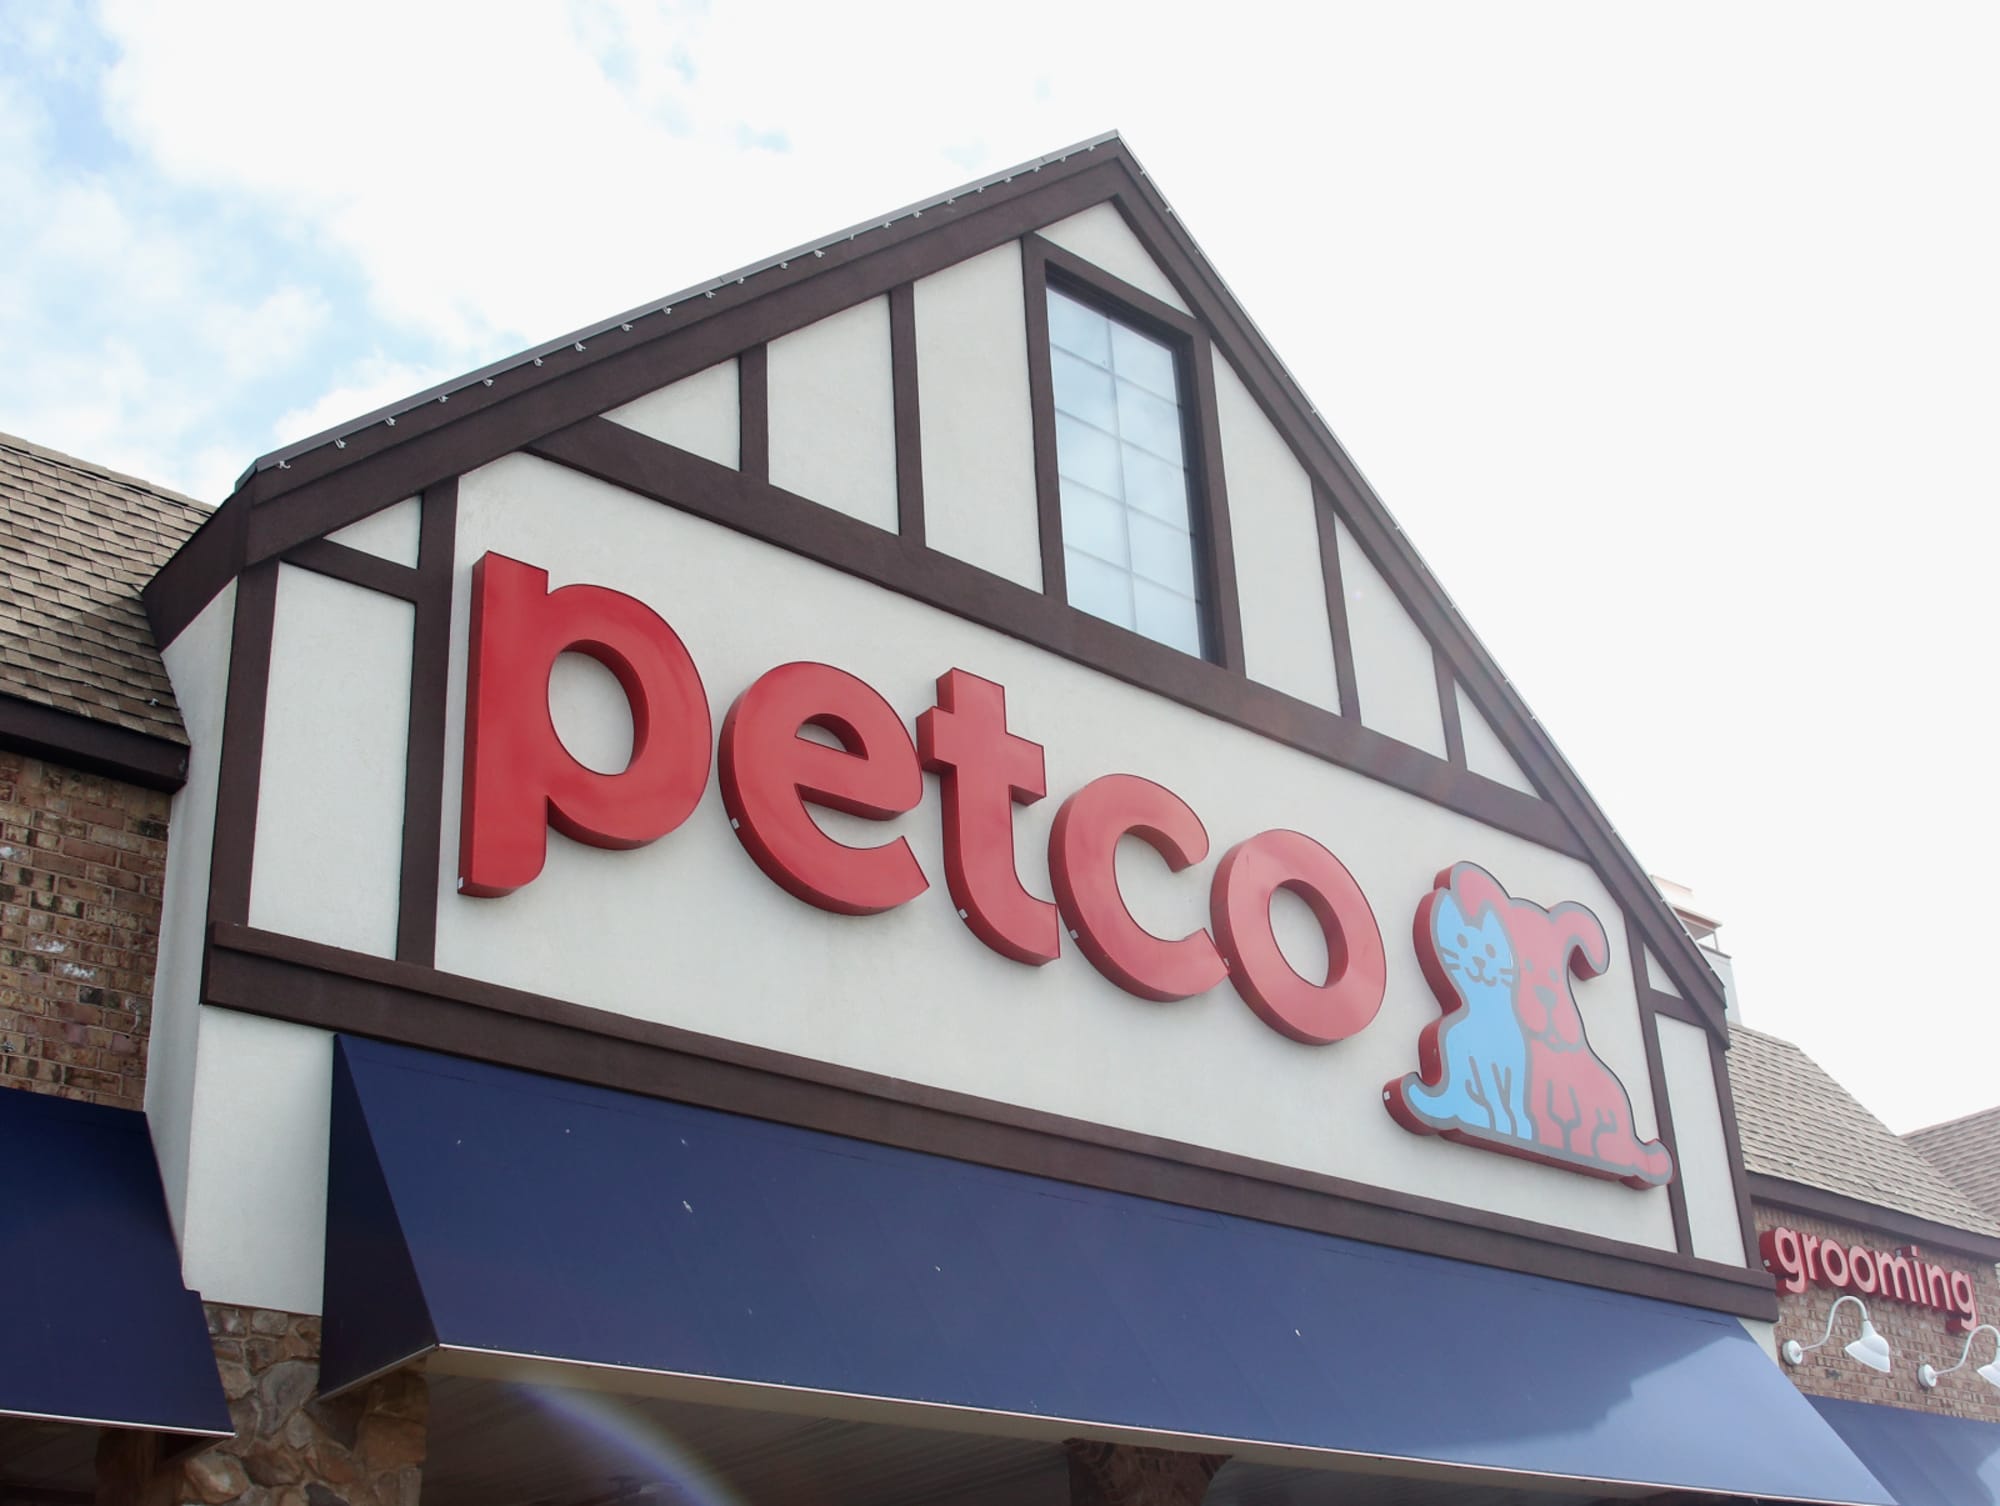 Petco Will the store be open on Easter Sunday 2023?